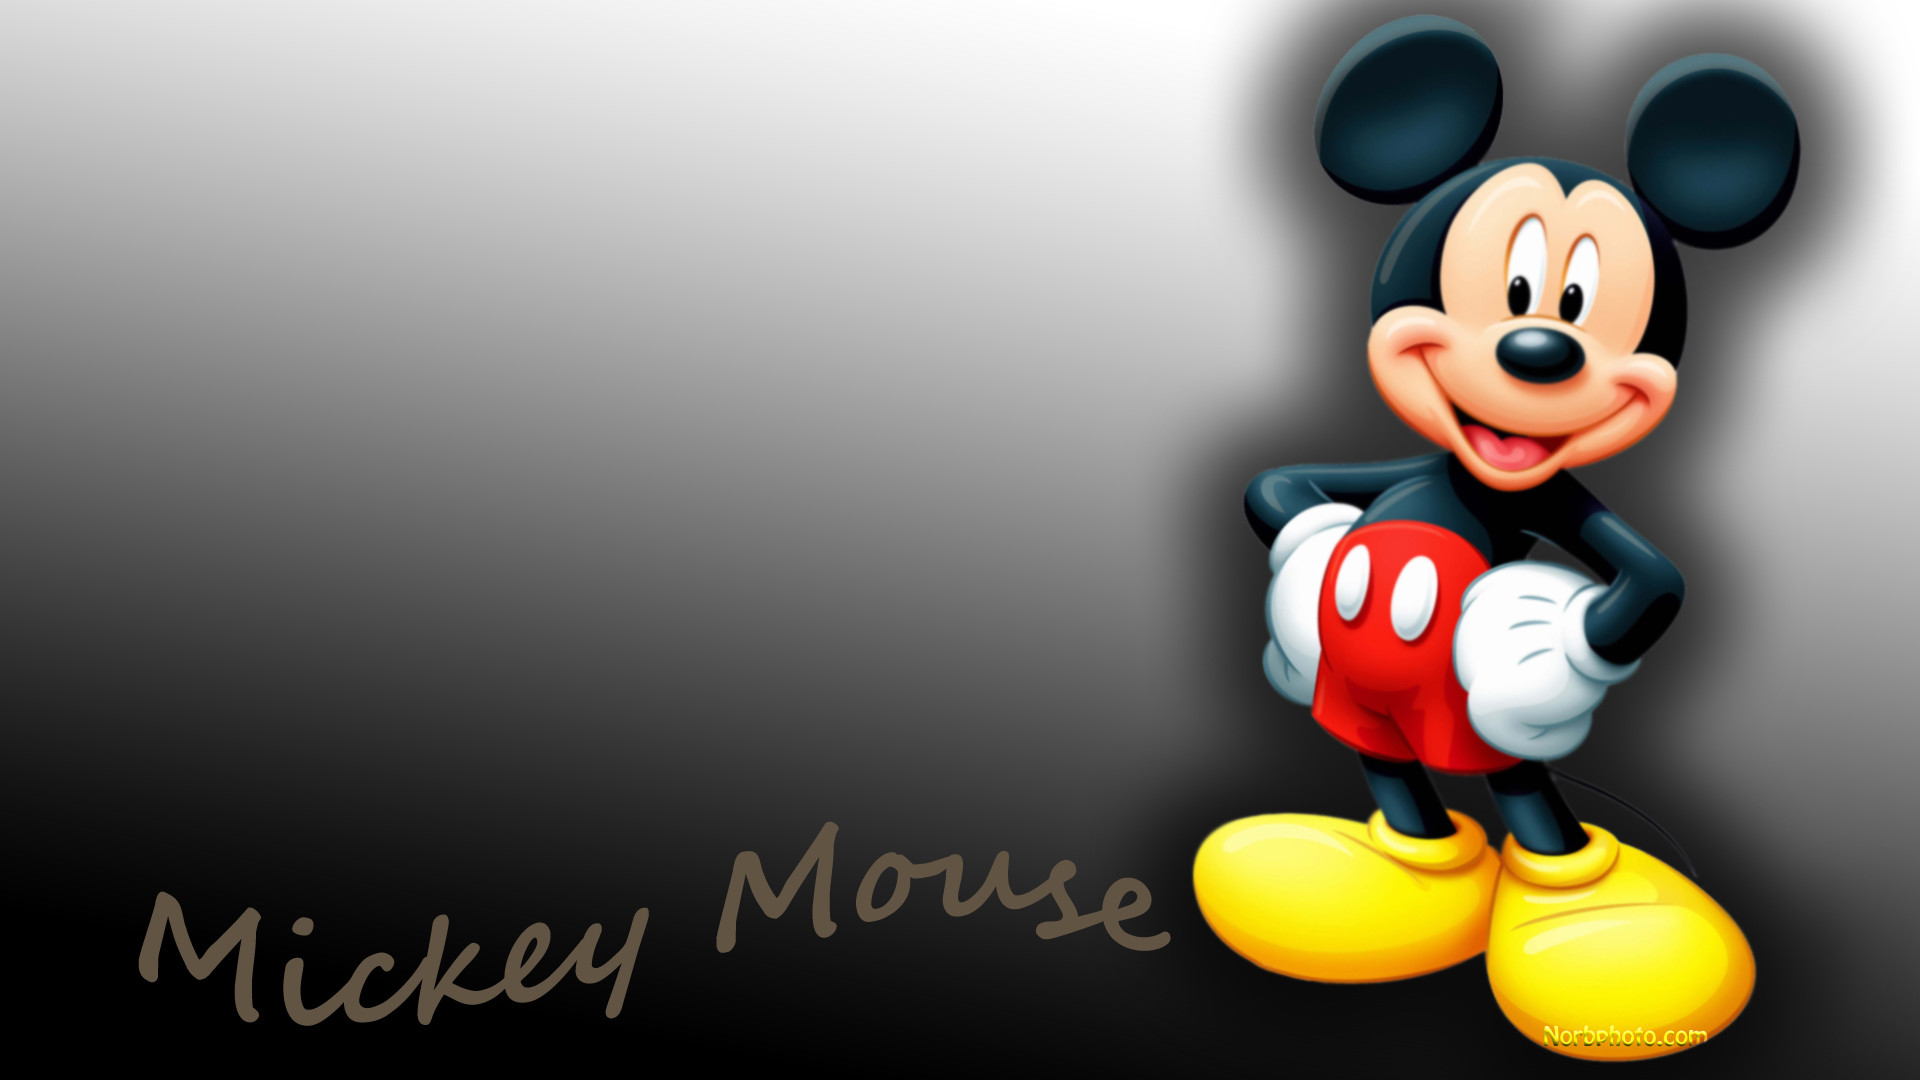 1920x1080 Mickey Mouse wallpaper 223331